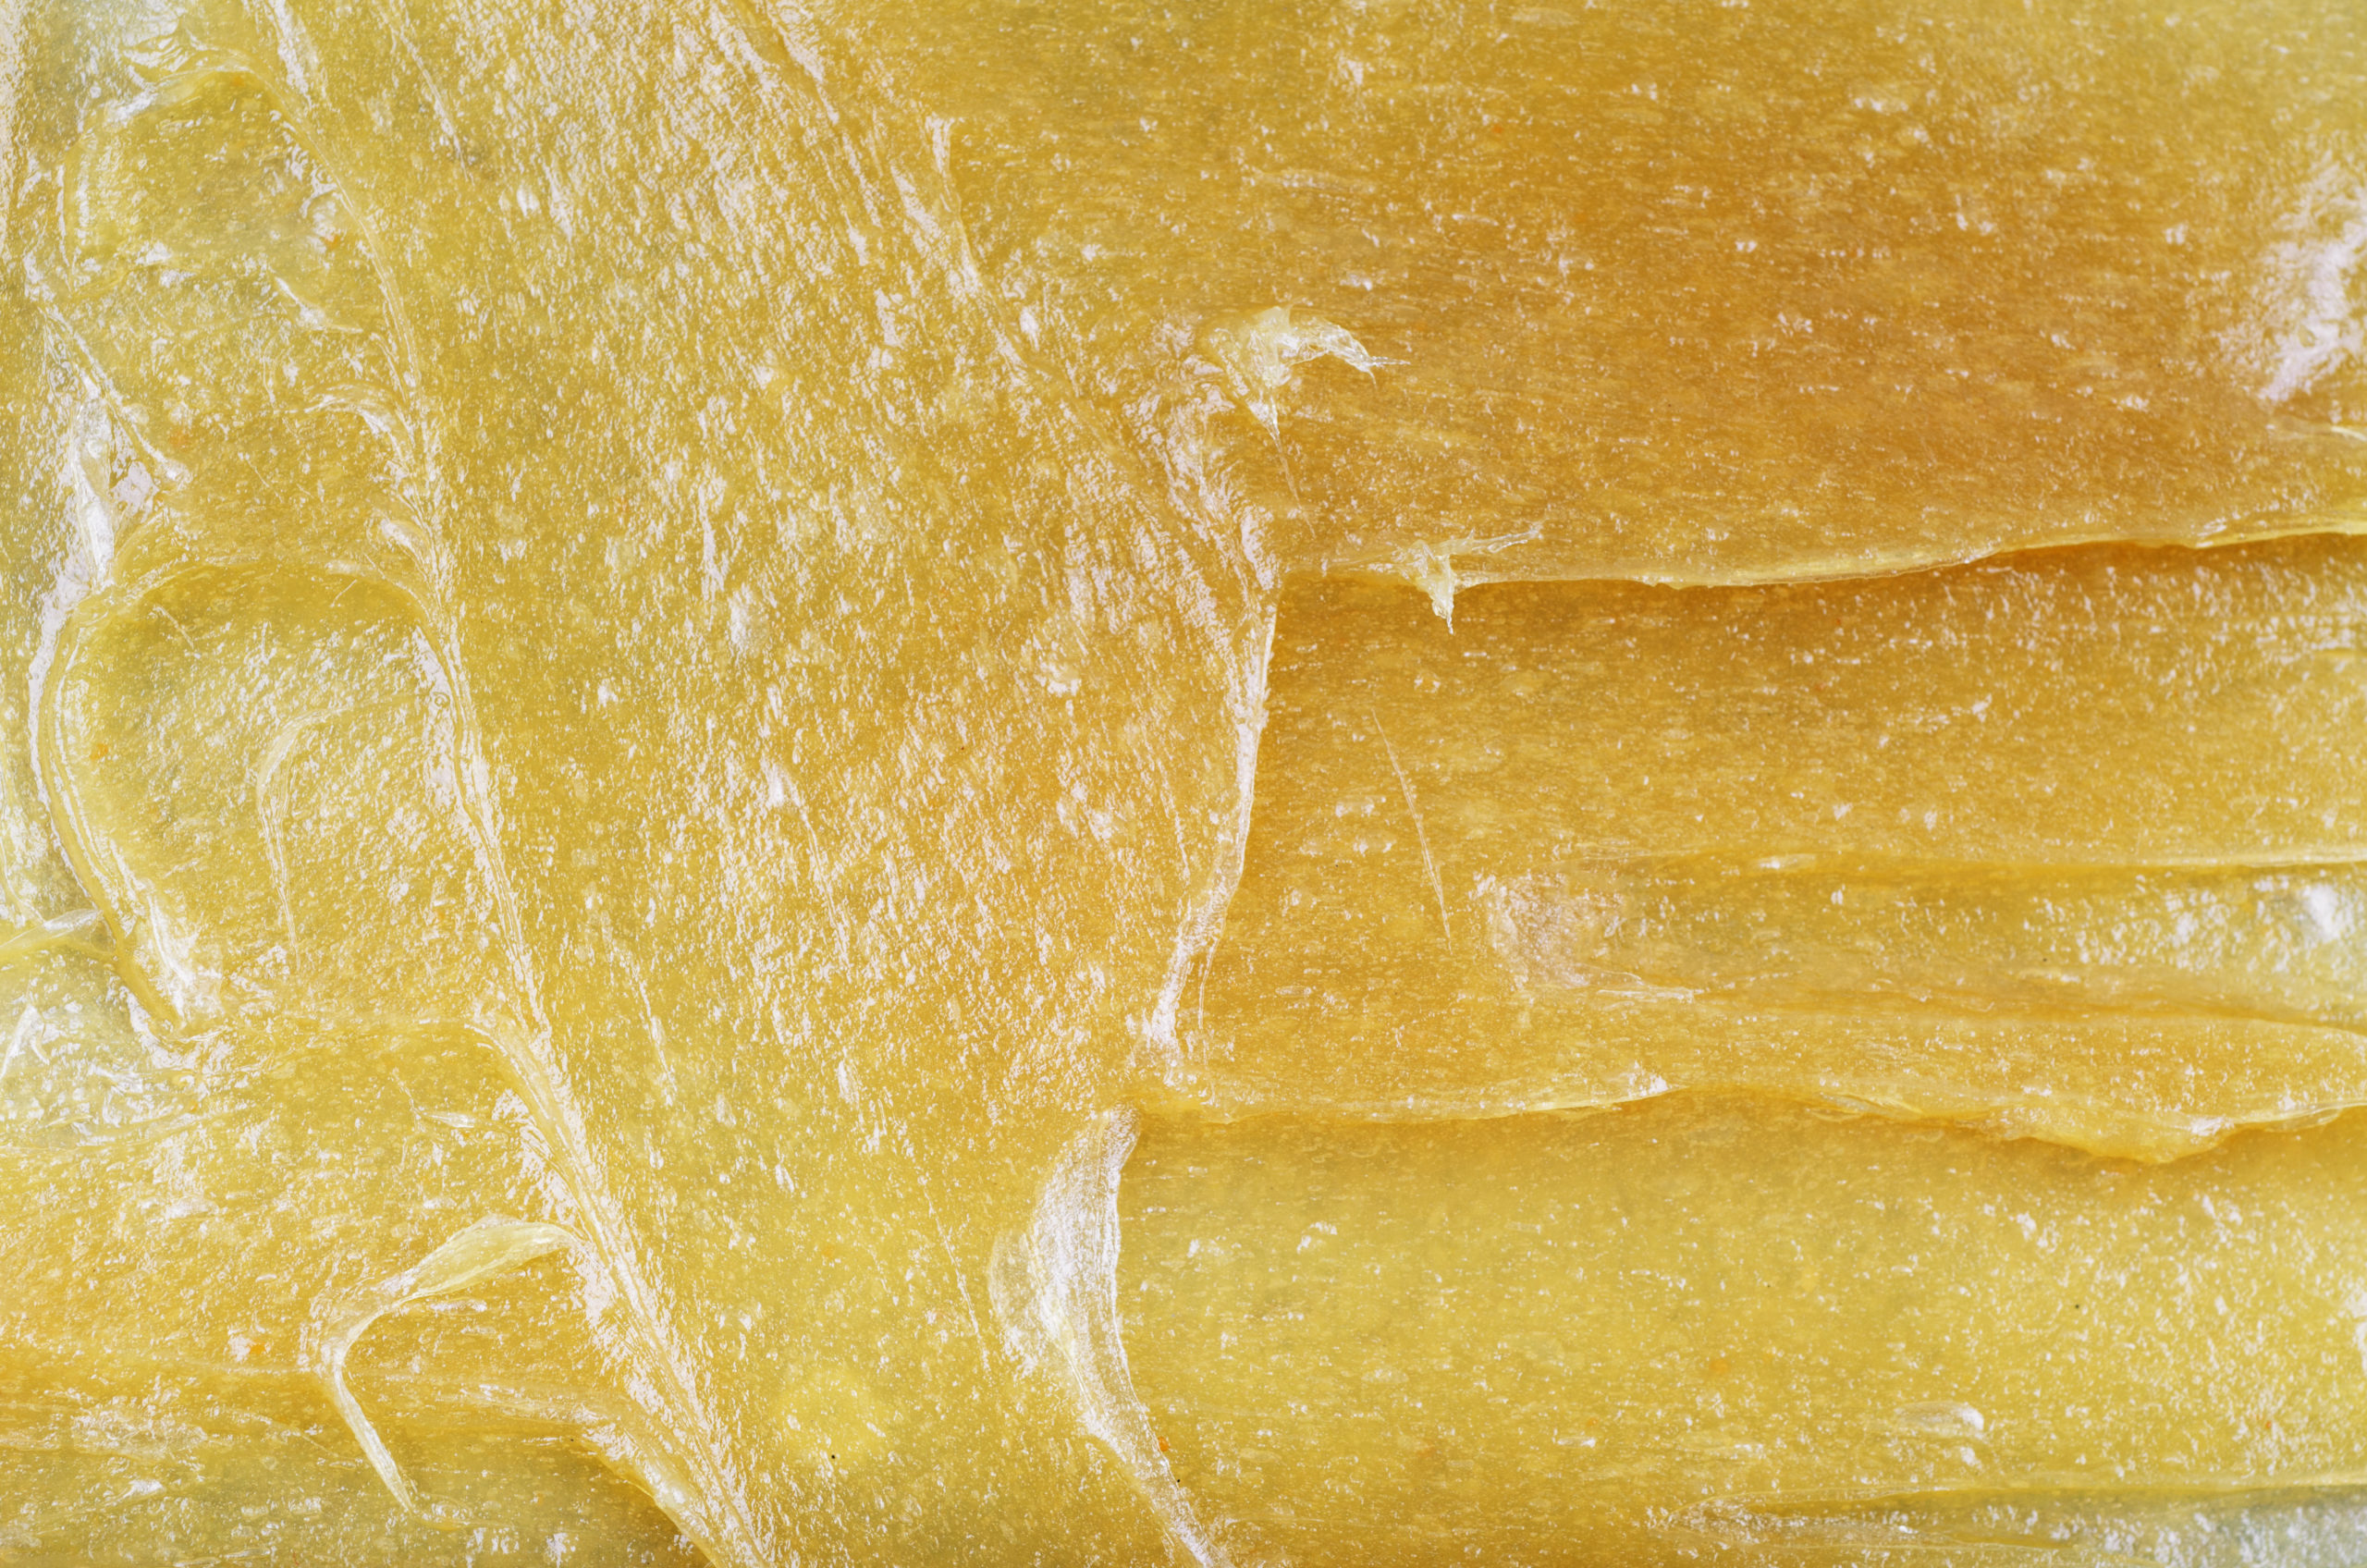 A close up of a thick yellow substance with white spots